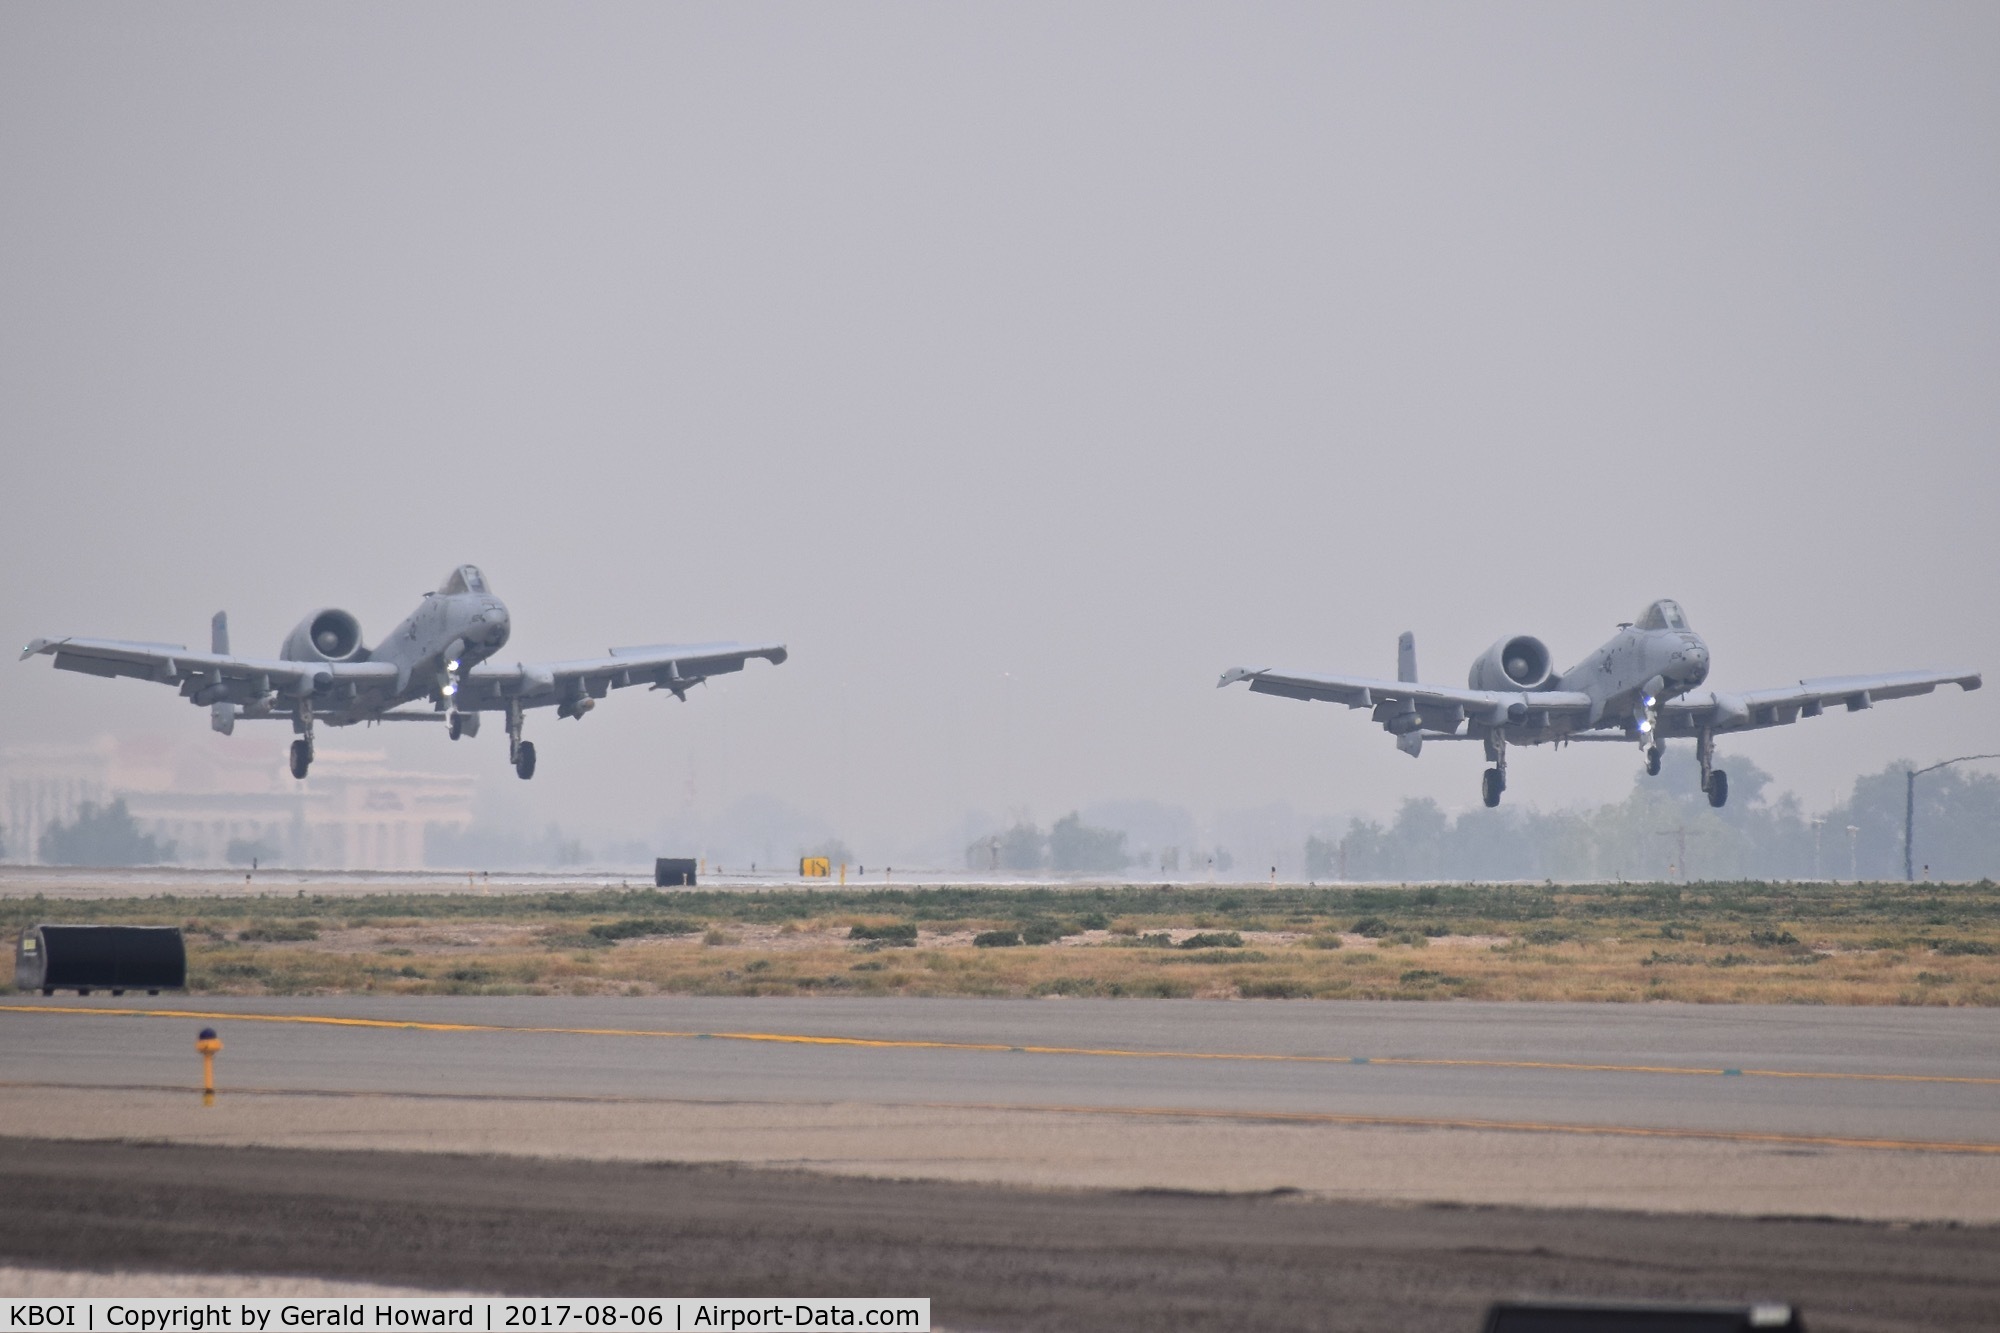 Boise Air Terminal/gowen Fld Airport (BOI) - Two A-10Cs from the 190th Fighter Sq., Idaho ANG making a formation landing on a 4 mile vis, smoky day.